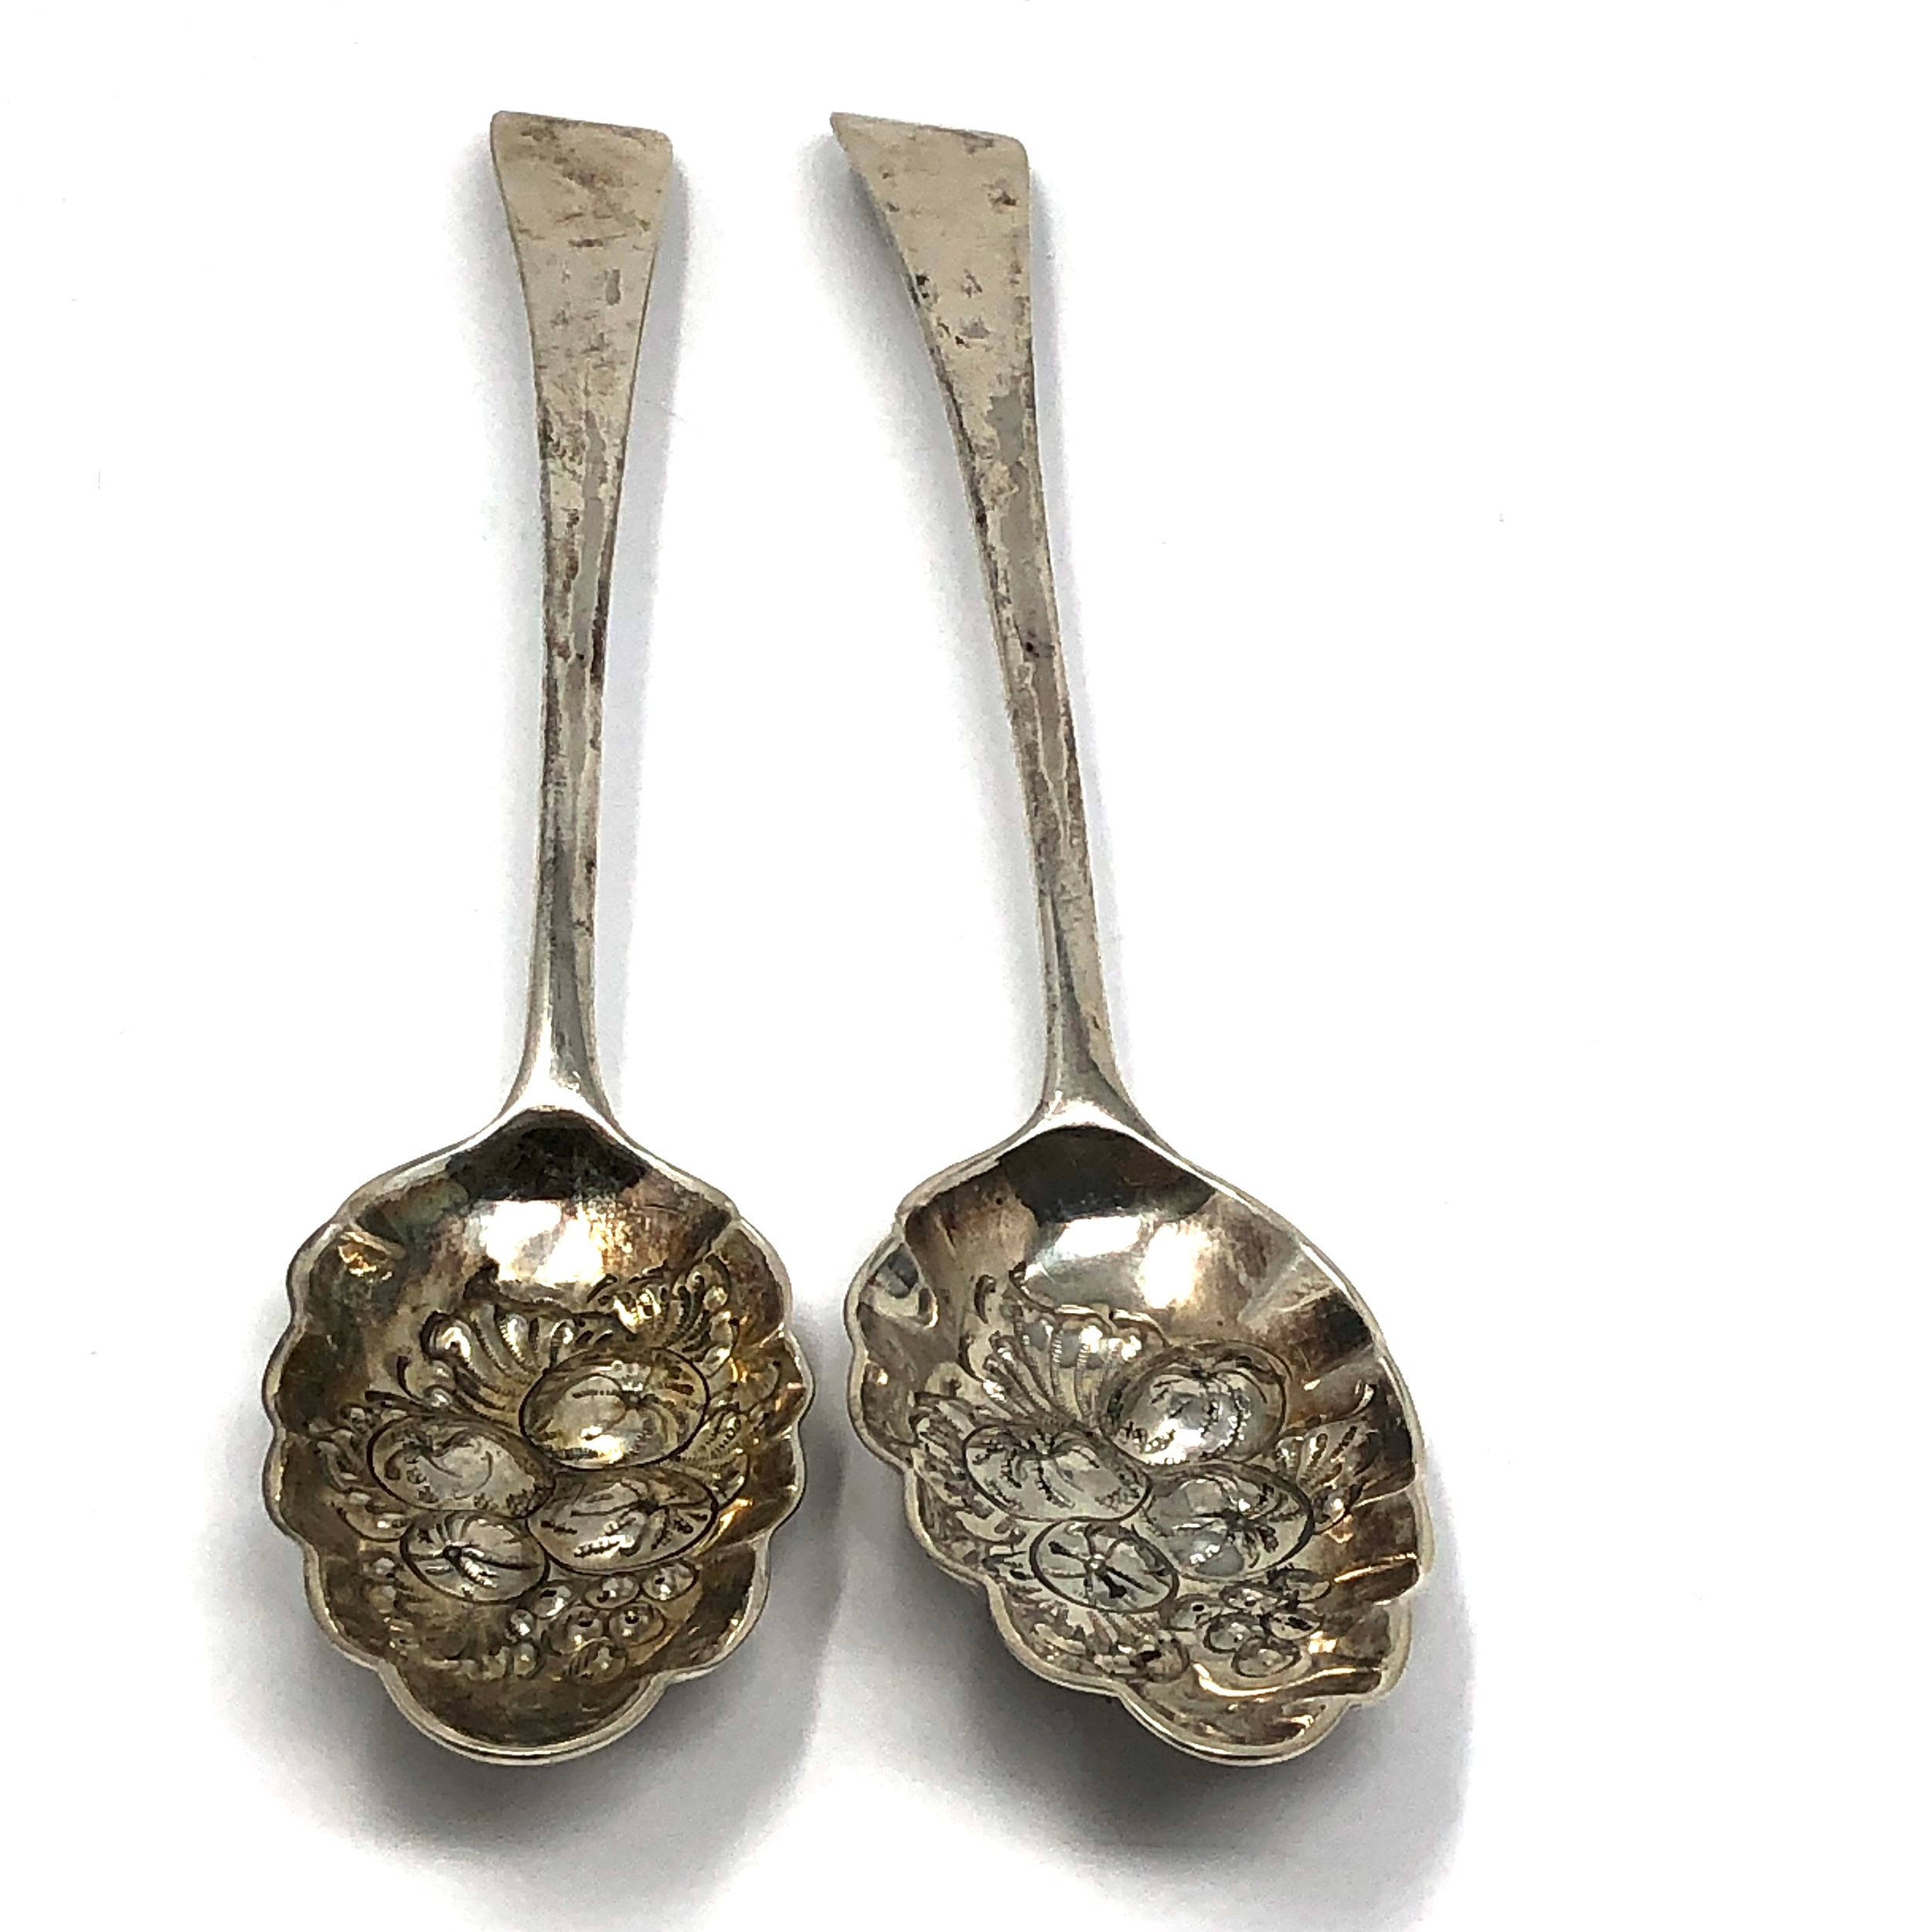 Pair of antique georgian silver berry spoons London silver hallmarks weight 123g each measure approx - Image 2 of 5